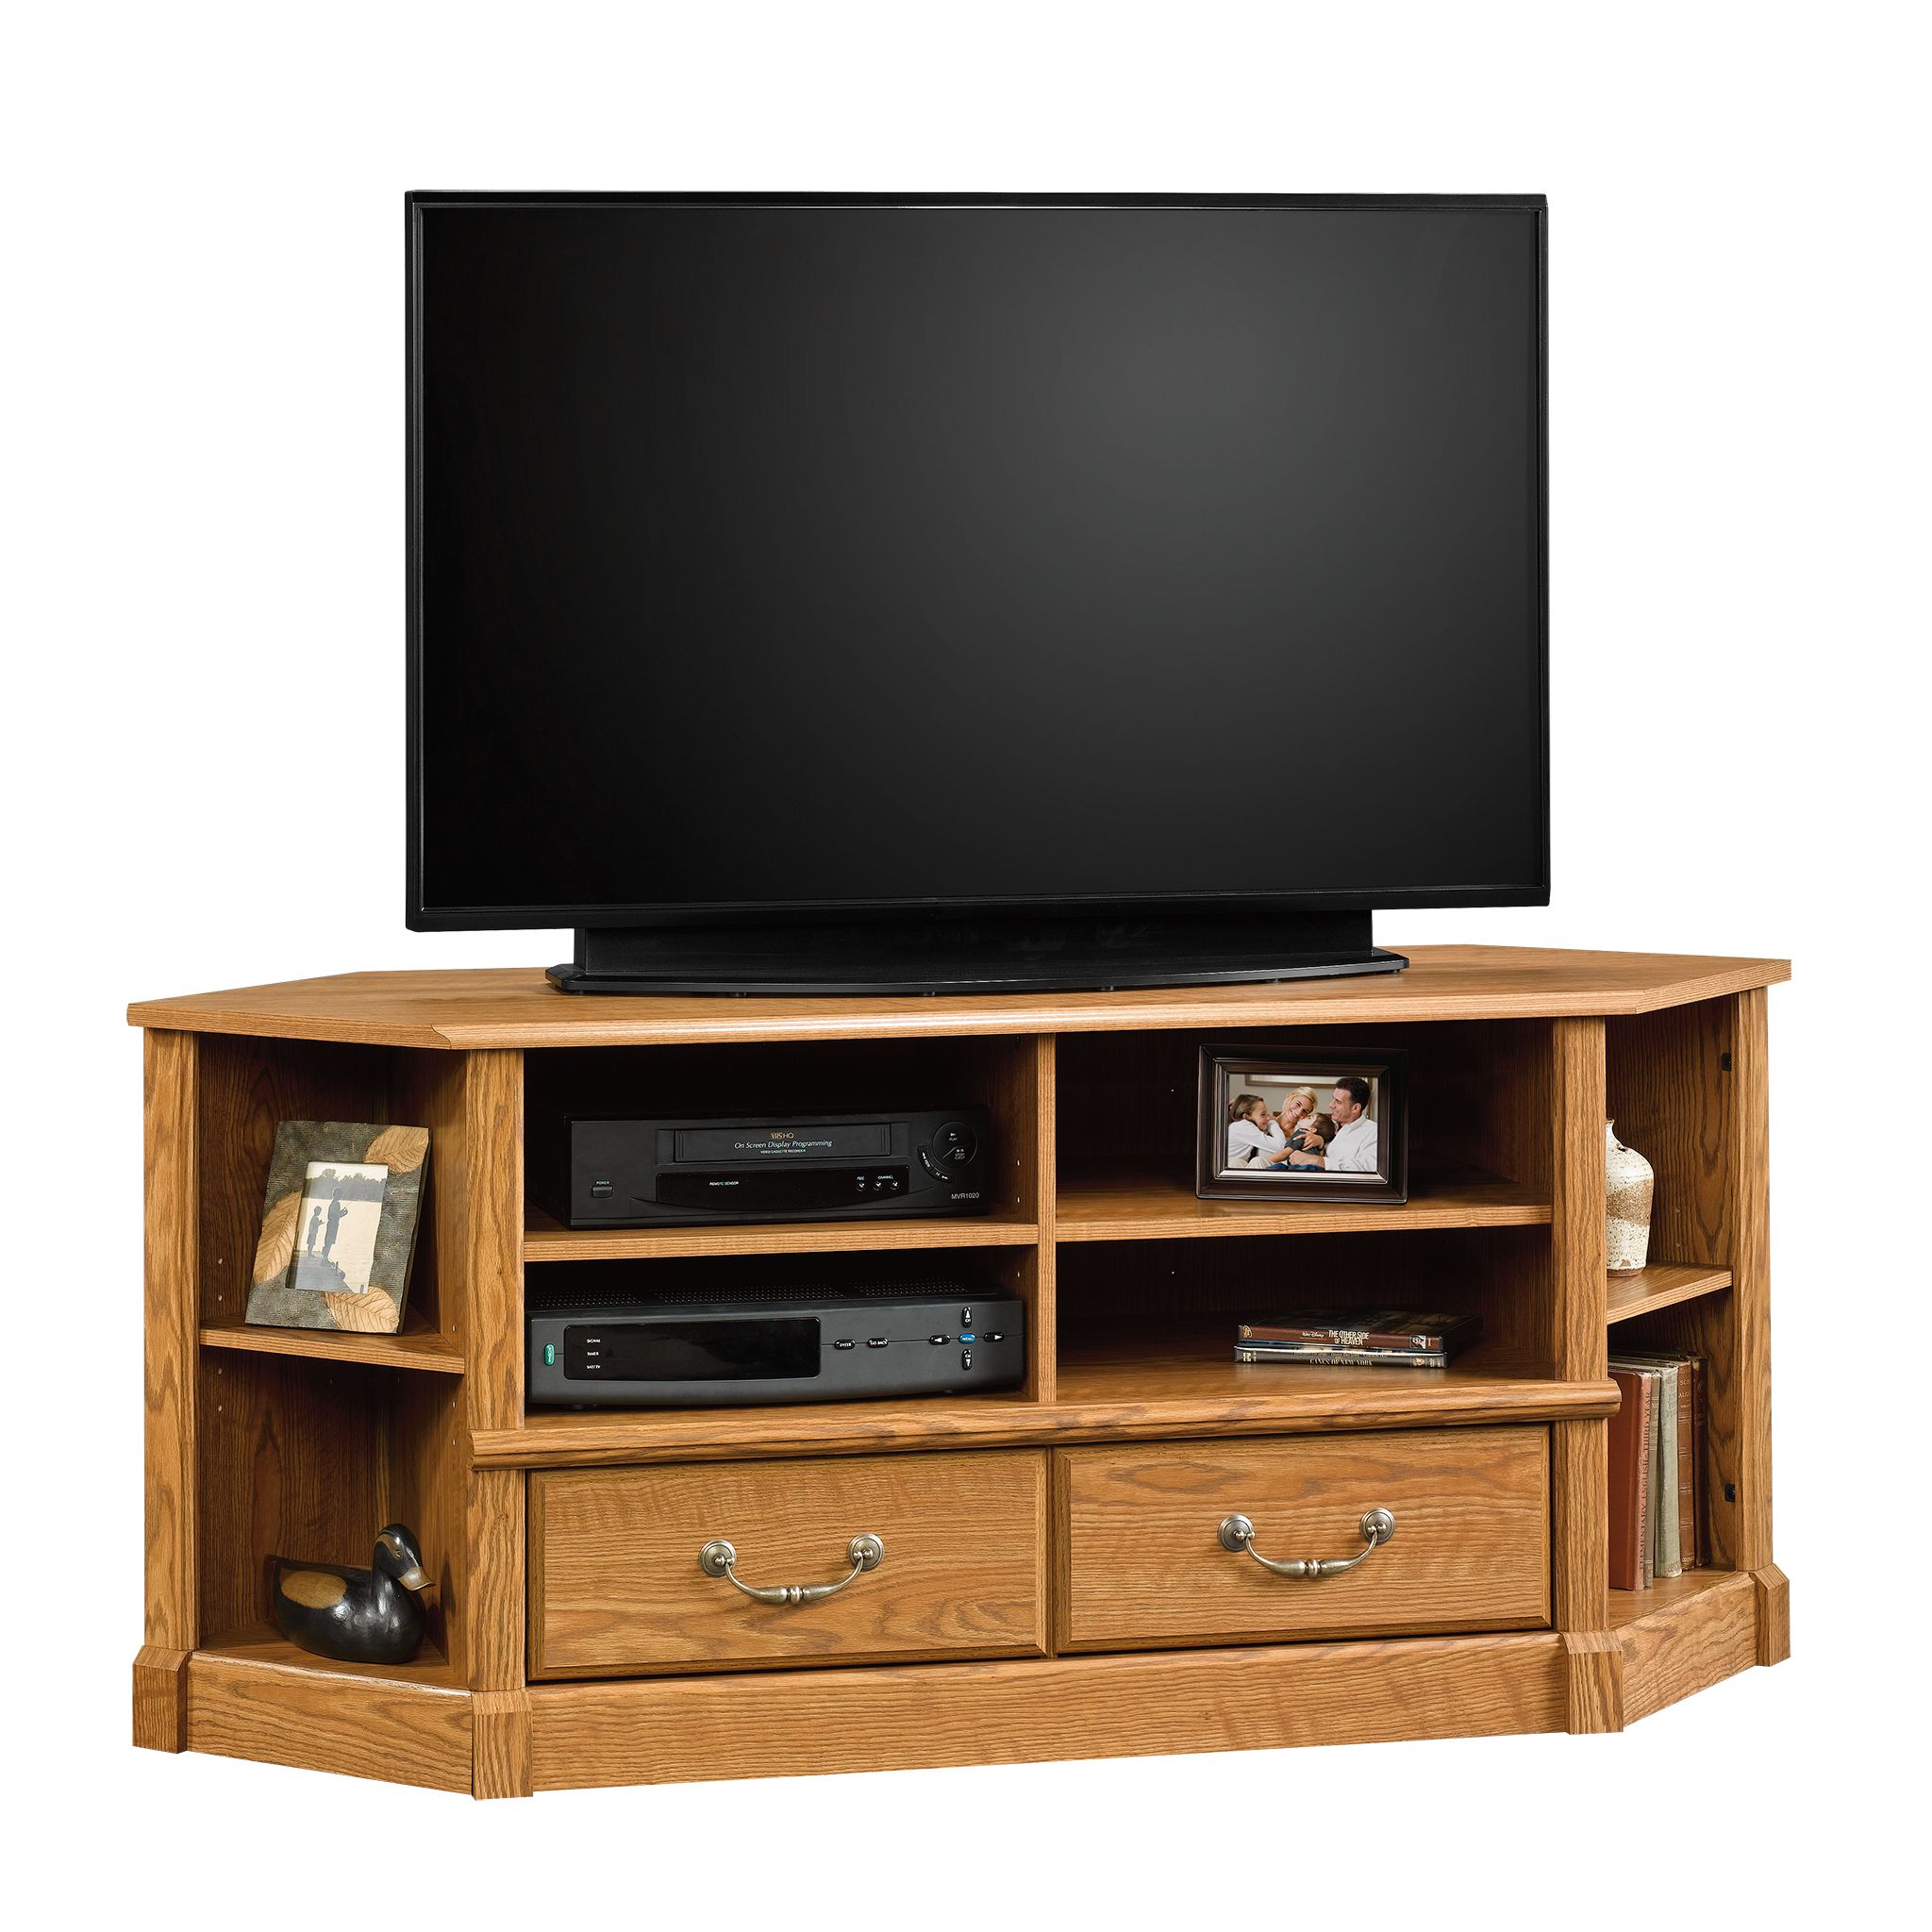 Sauder Orchard Hills Corner Tv Stand For Tvs Up To 50 With 50 Inch Corner Tv Cabinets (View 2 of 15)